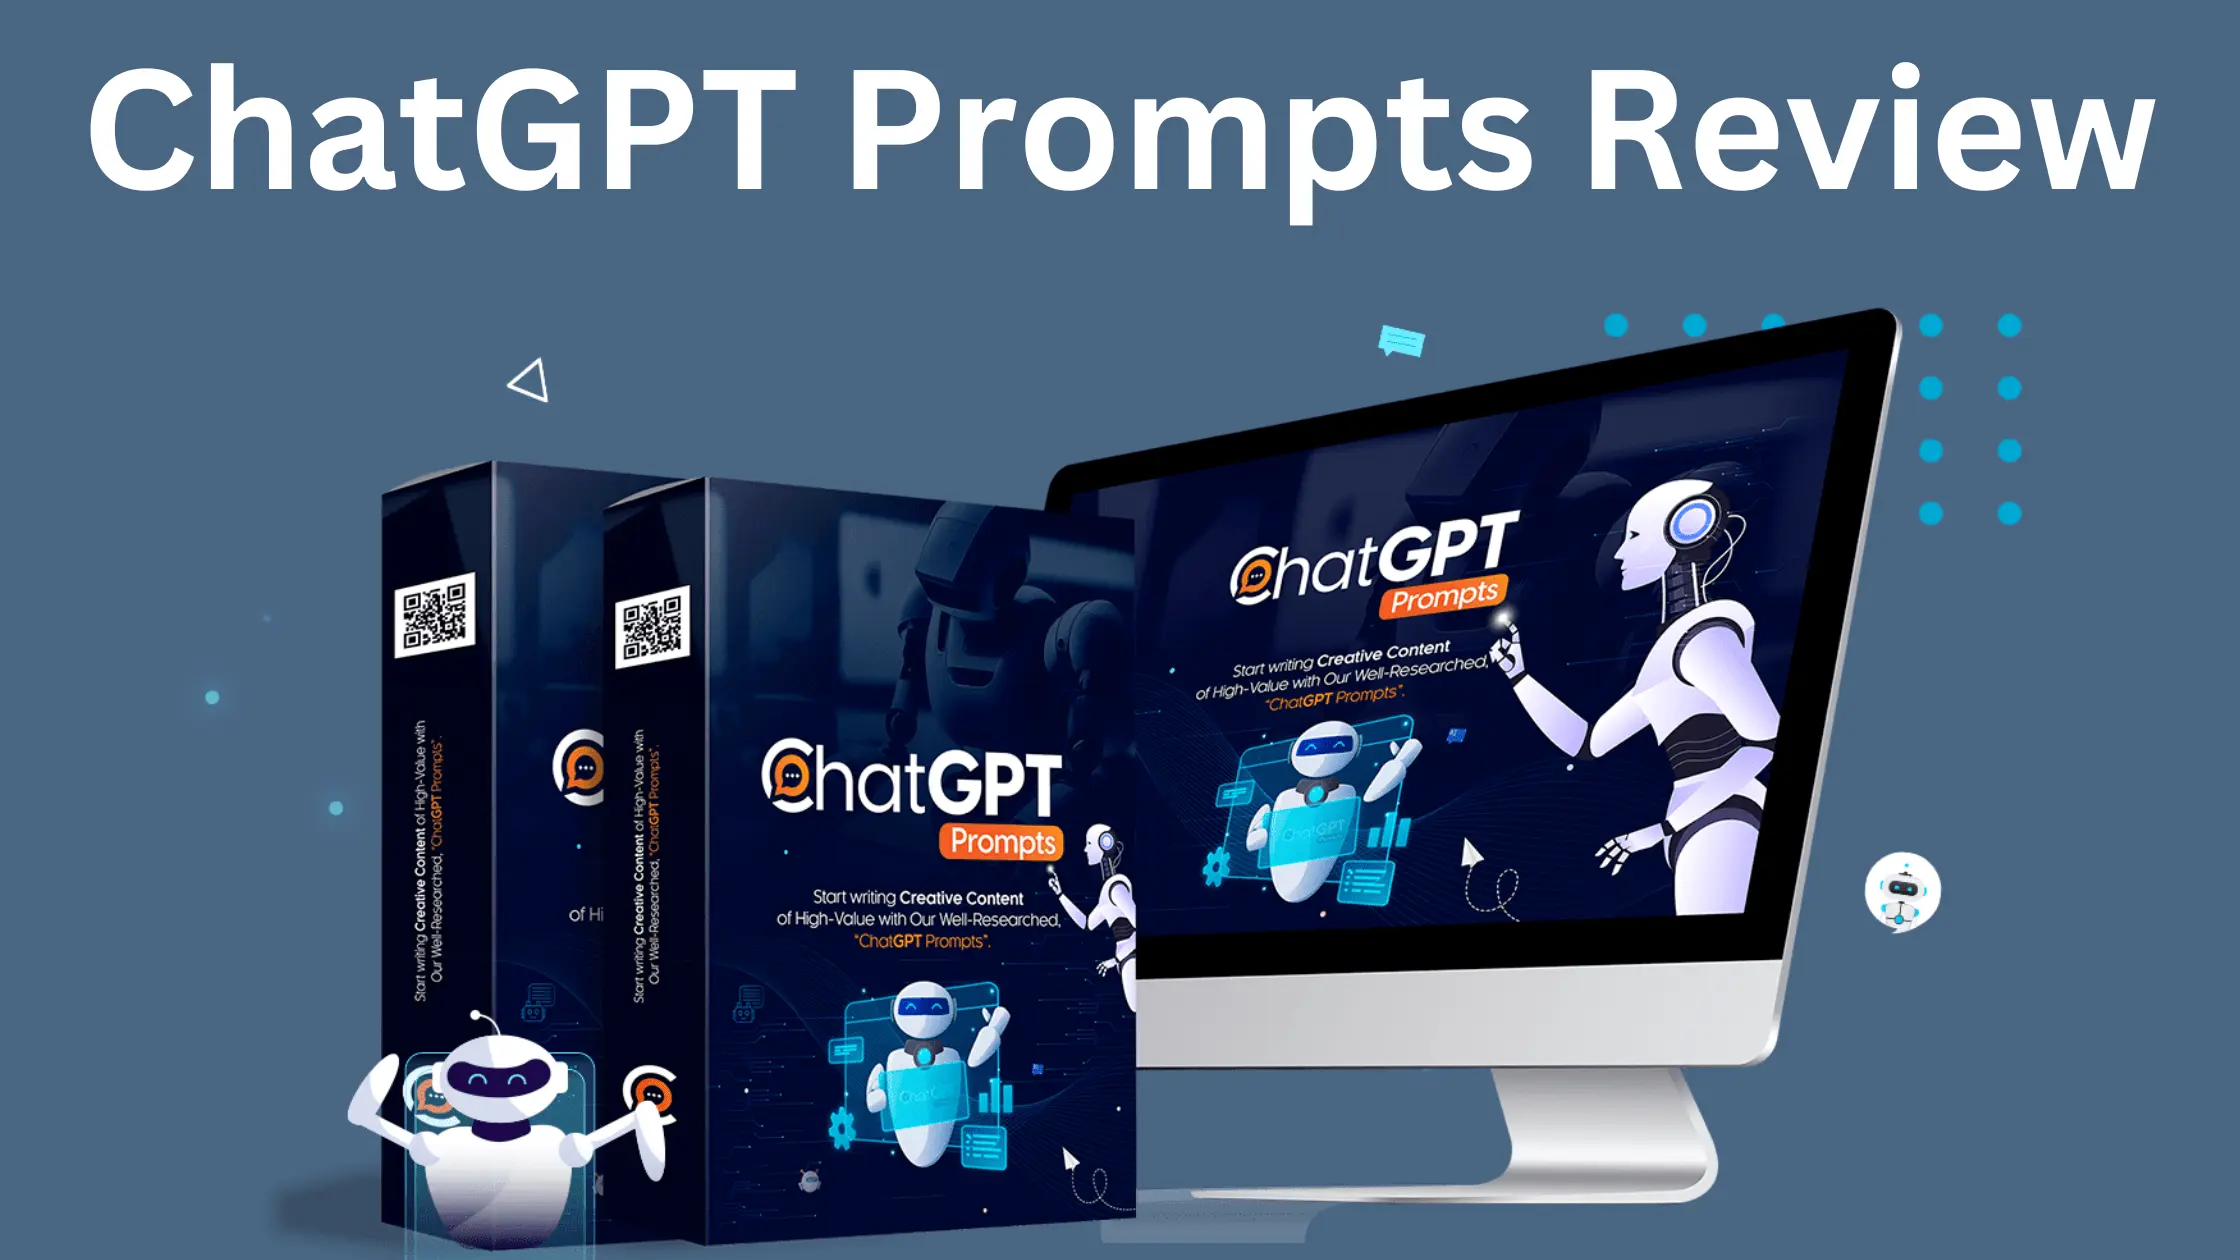 ChatGPT Prompts Review